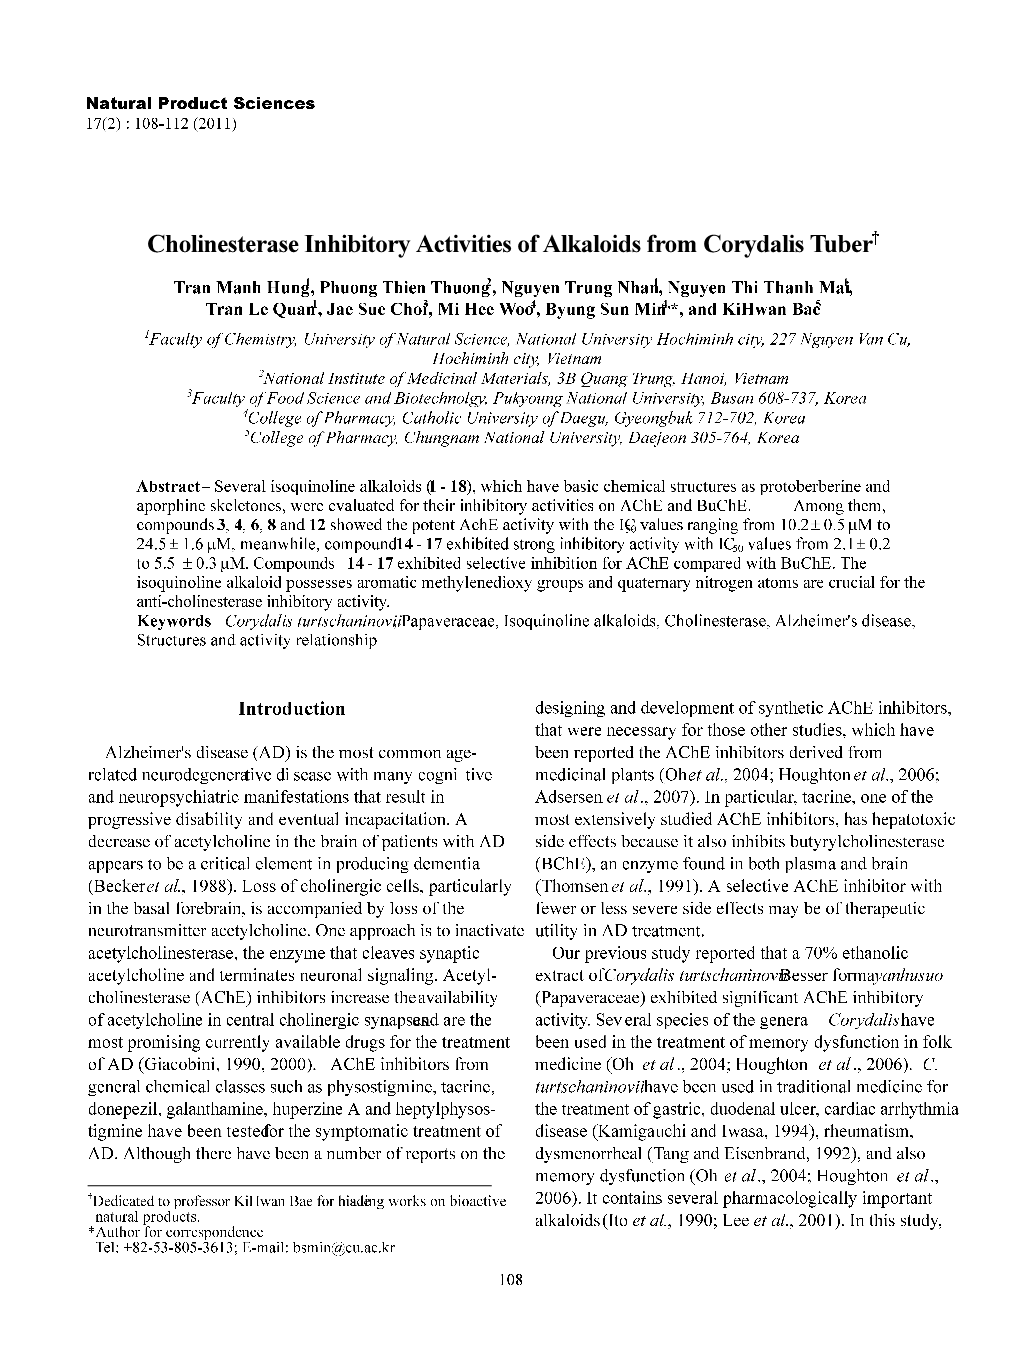 Cholinesterase Inhibitory Activities of Alkaloids from Corydalis Tuber†